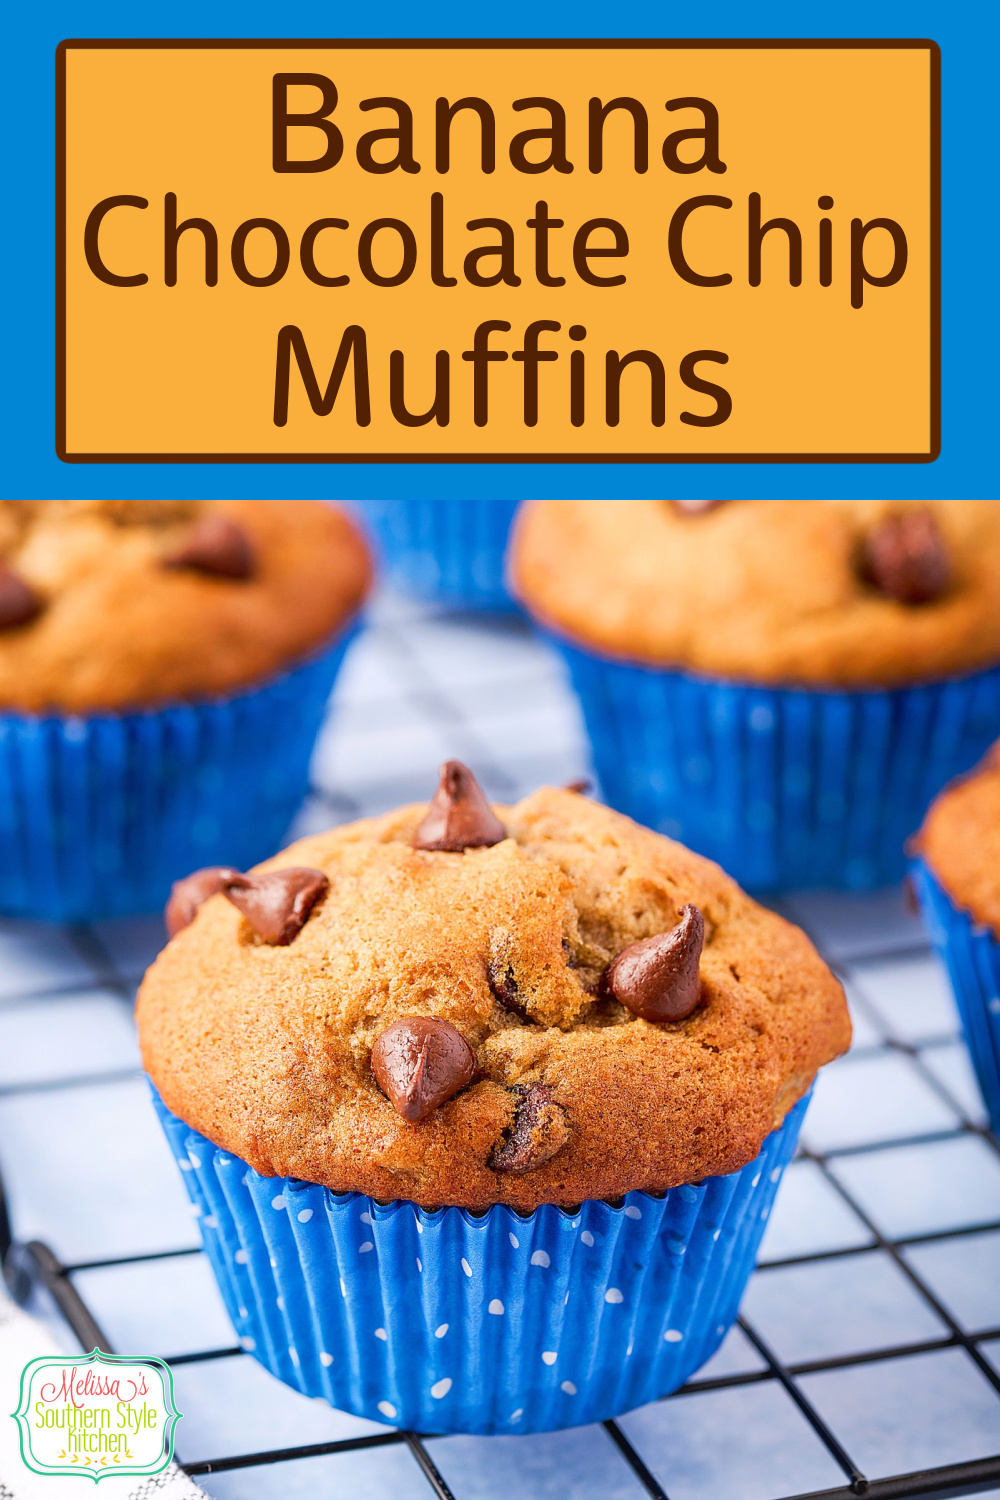 This Banana Chocolate Chip Muffins recipe features a moist homemade banana batter that's dressed up with a heaping helping of chocolate chips. #bananamuffins #chocolatechipmuffins #muffinsrecipes #bananabread #bananas #bananarecipes #easymuffinsrecipe via @melissasssk